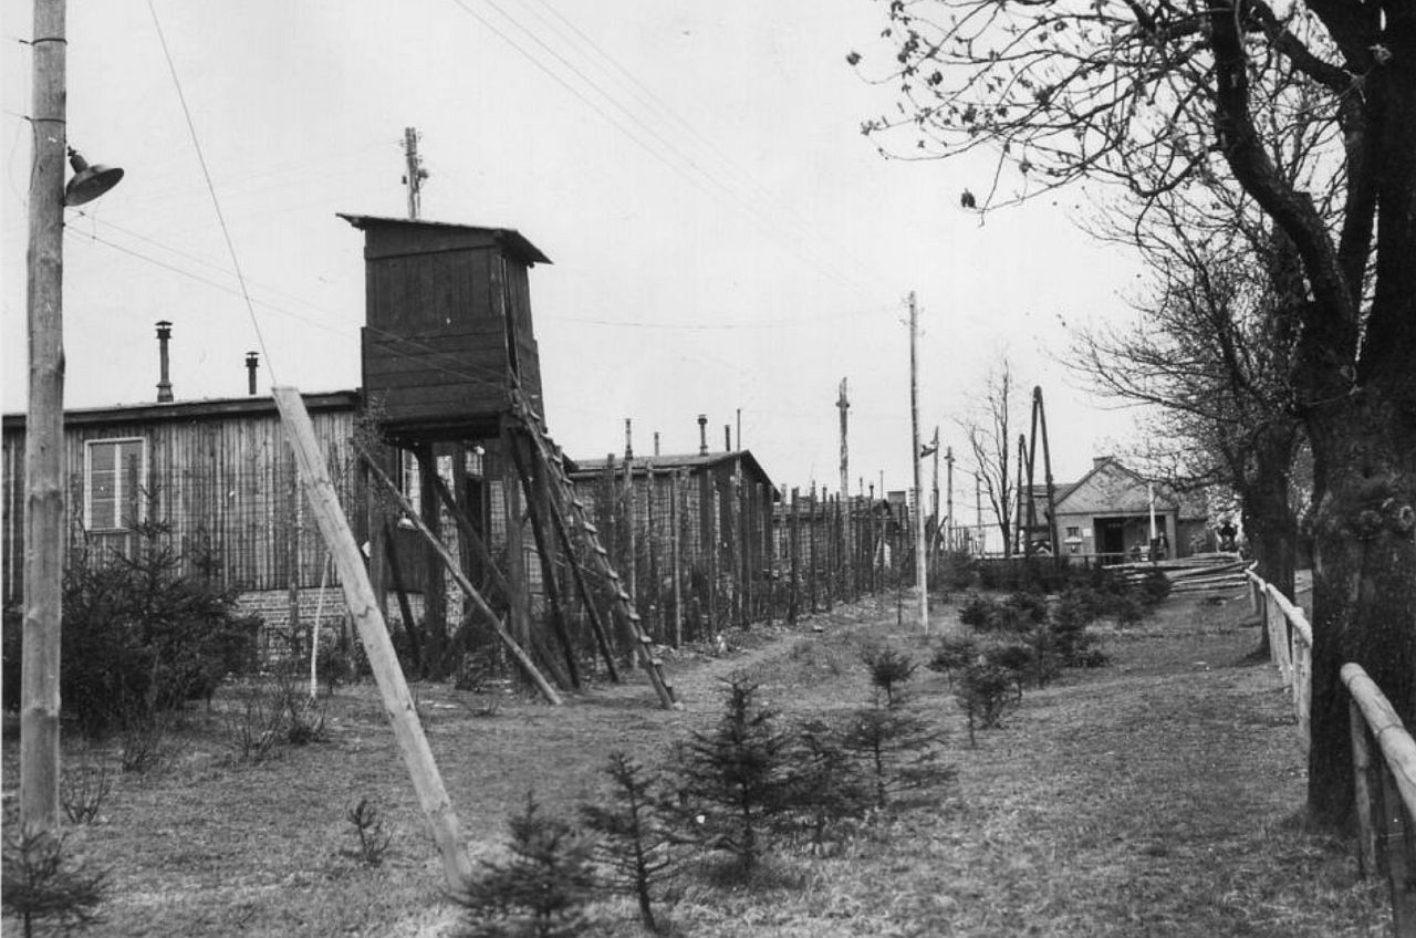 View of a watchtower and the camp fence of the Buchenwald subcamp Ohrdruf. The watchtower looks provisional and reminds of a hunter's stand.